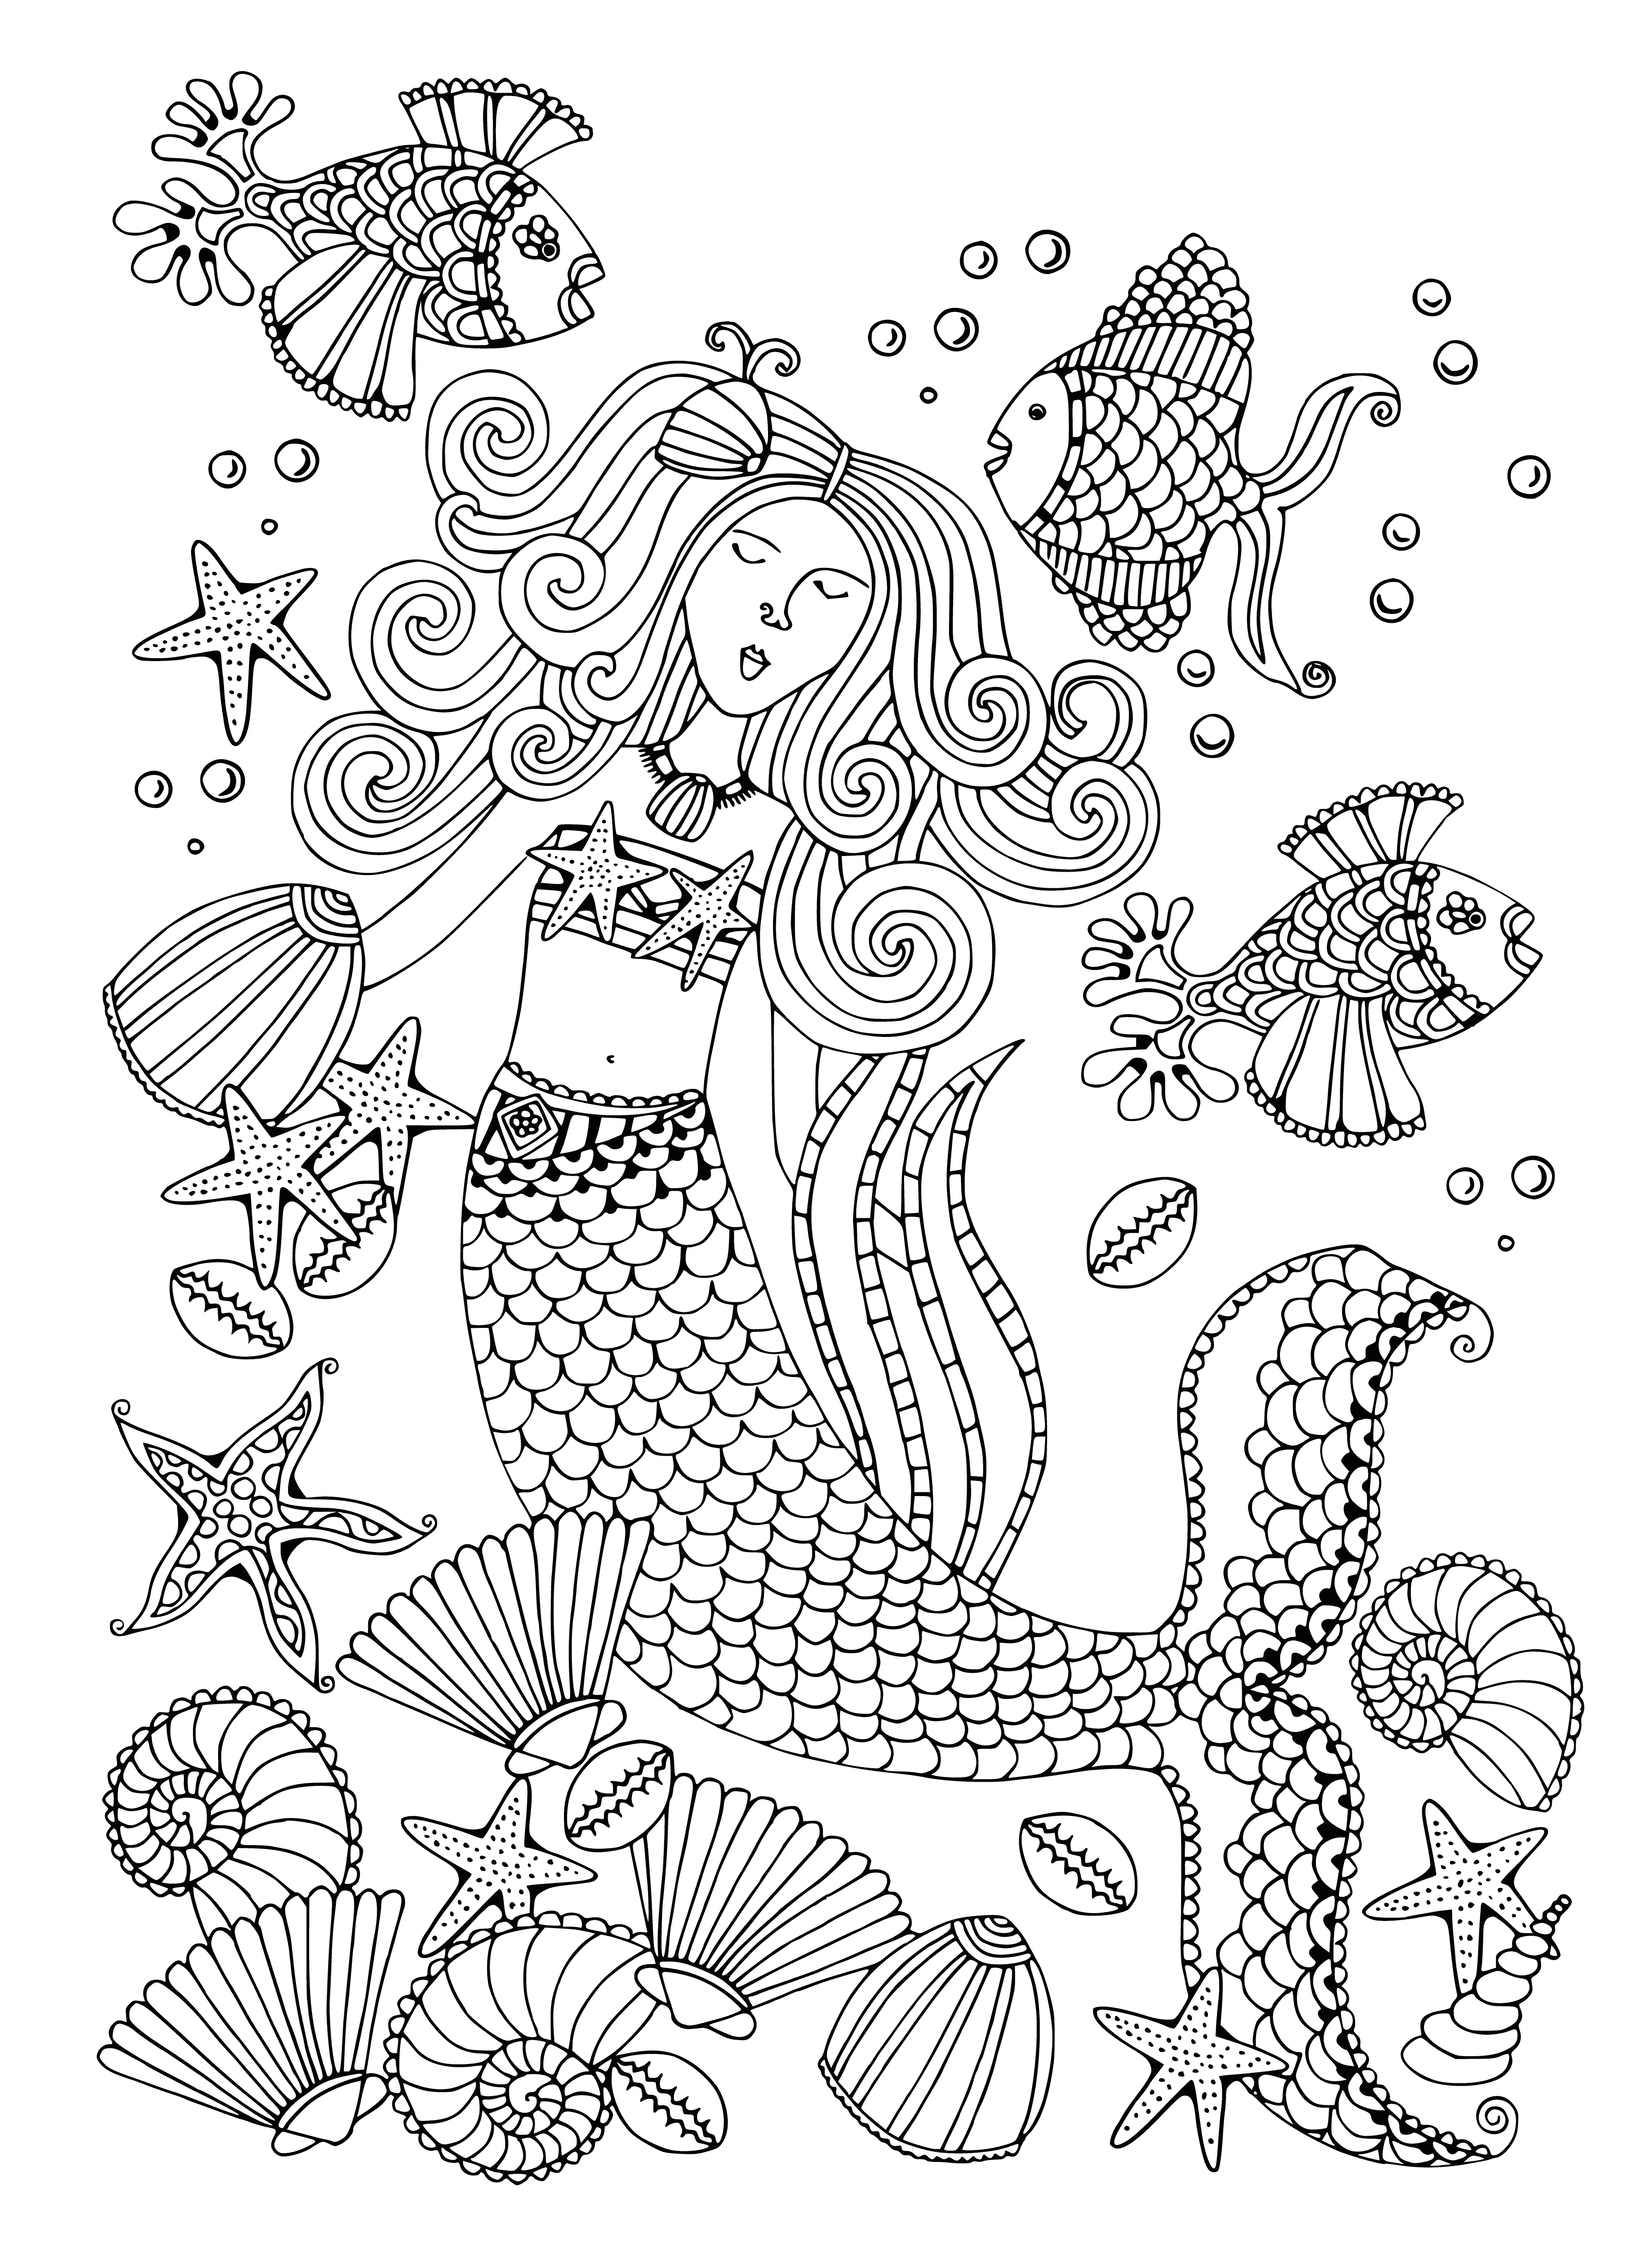 coloring page: A mermaid swims in an ocean with her purple fish friend. Her blonde hair flows behind her as they explore. #MermaidLife